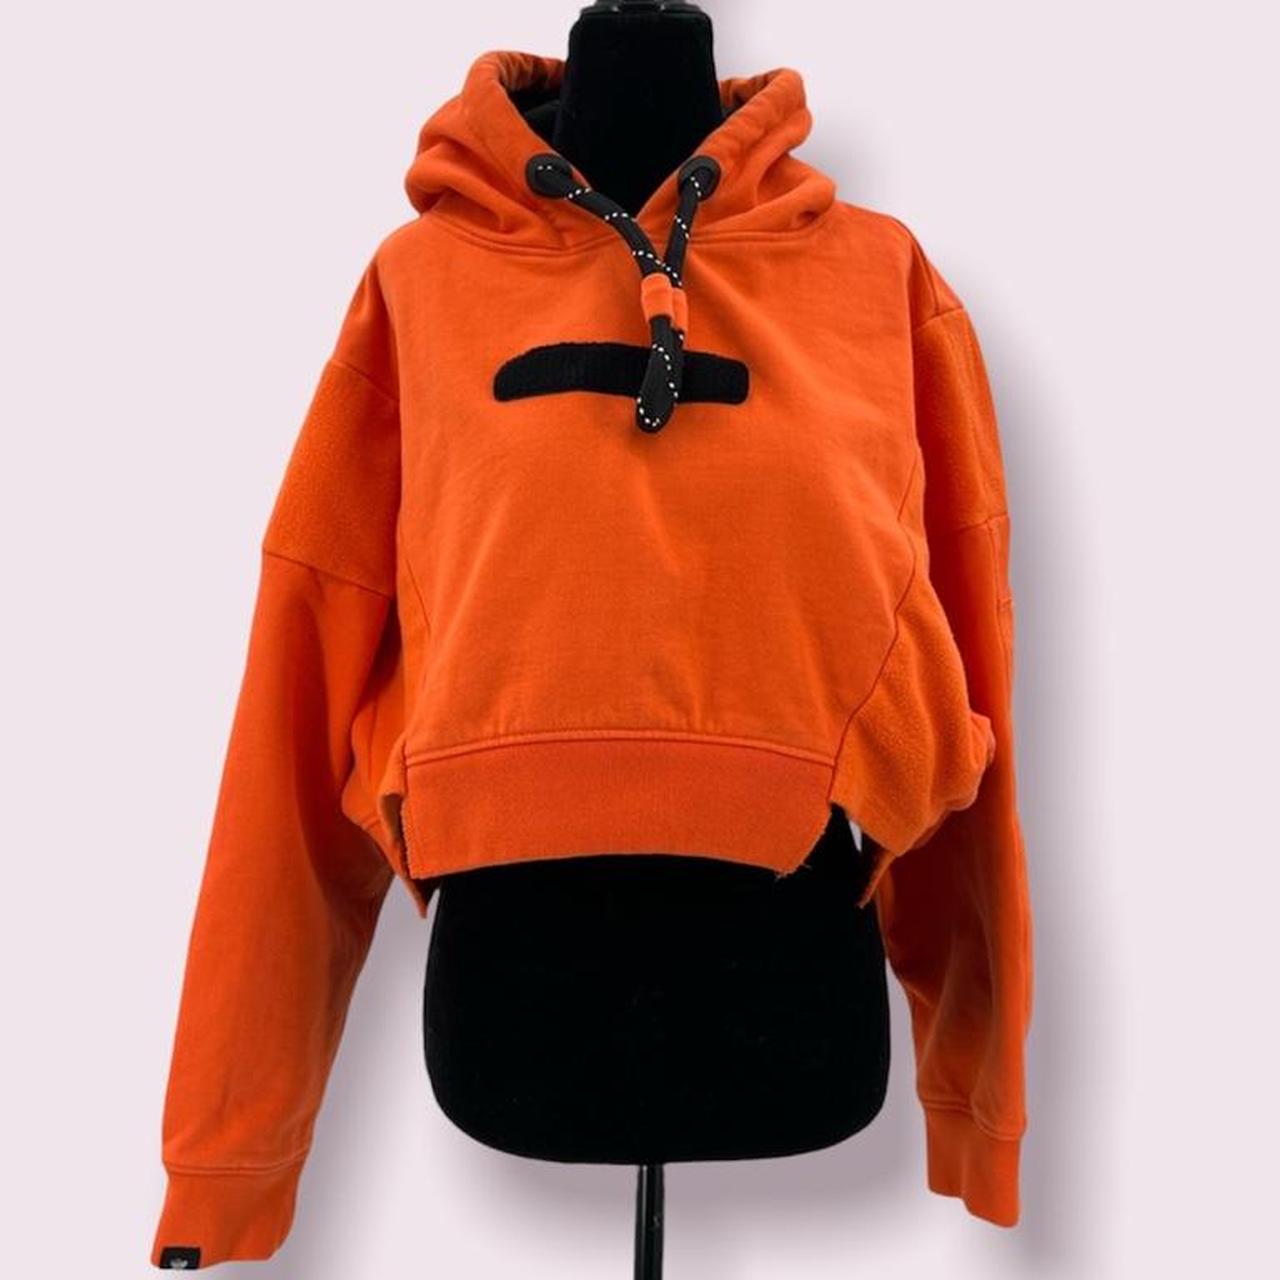 Product Image 1 - PARASUCO Orange cropped hoddie🧡
Excellent preowned